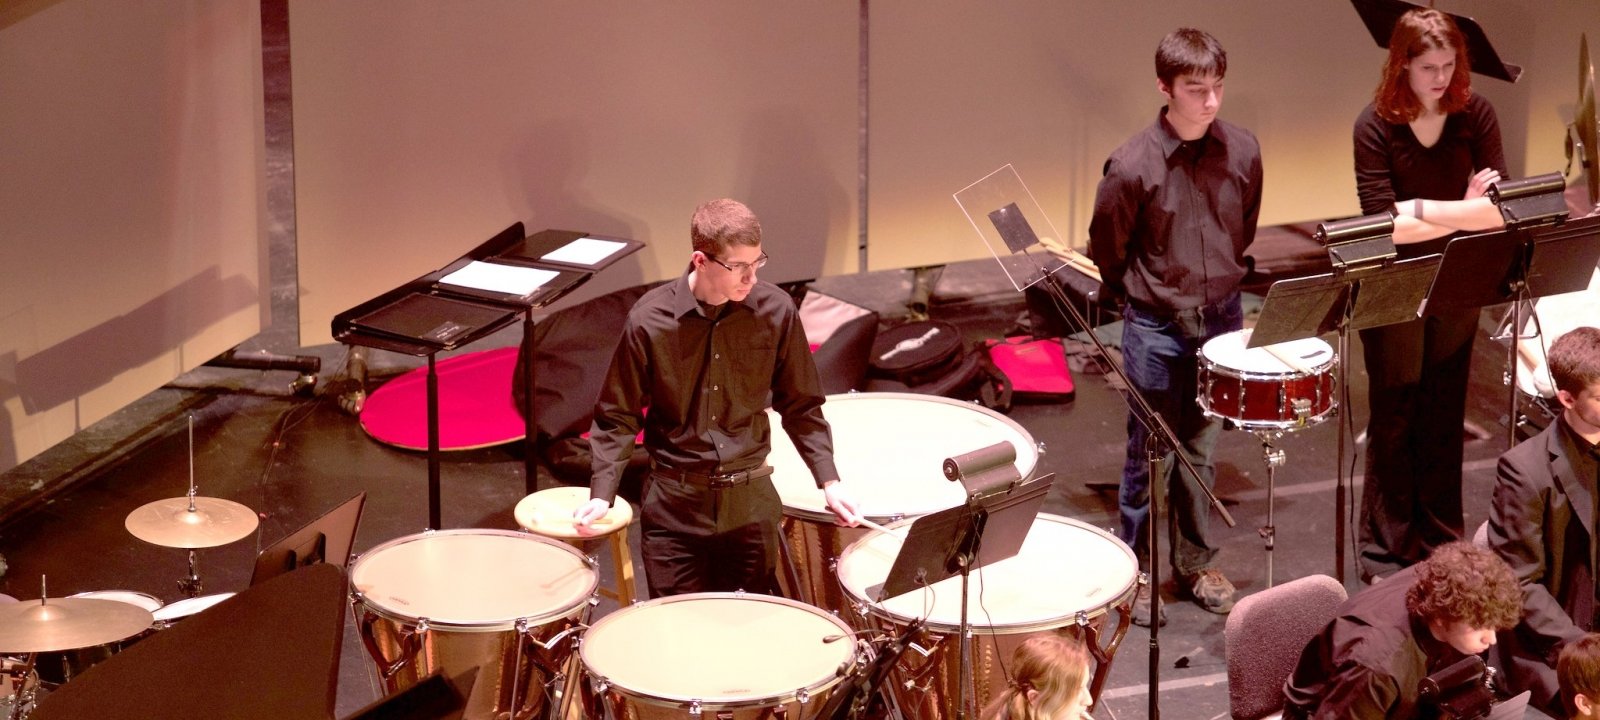 Student in a concert band standing in the middle playing large drums while looking a music on a music stand during a performance.